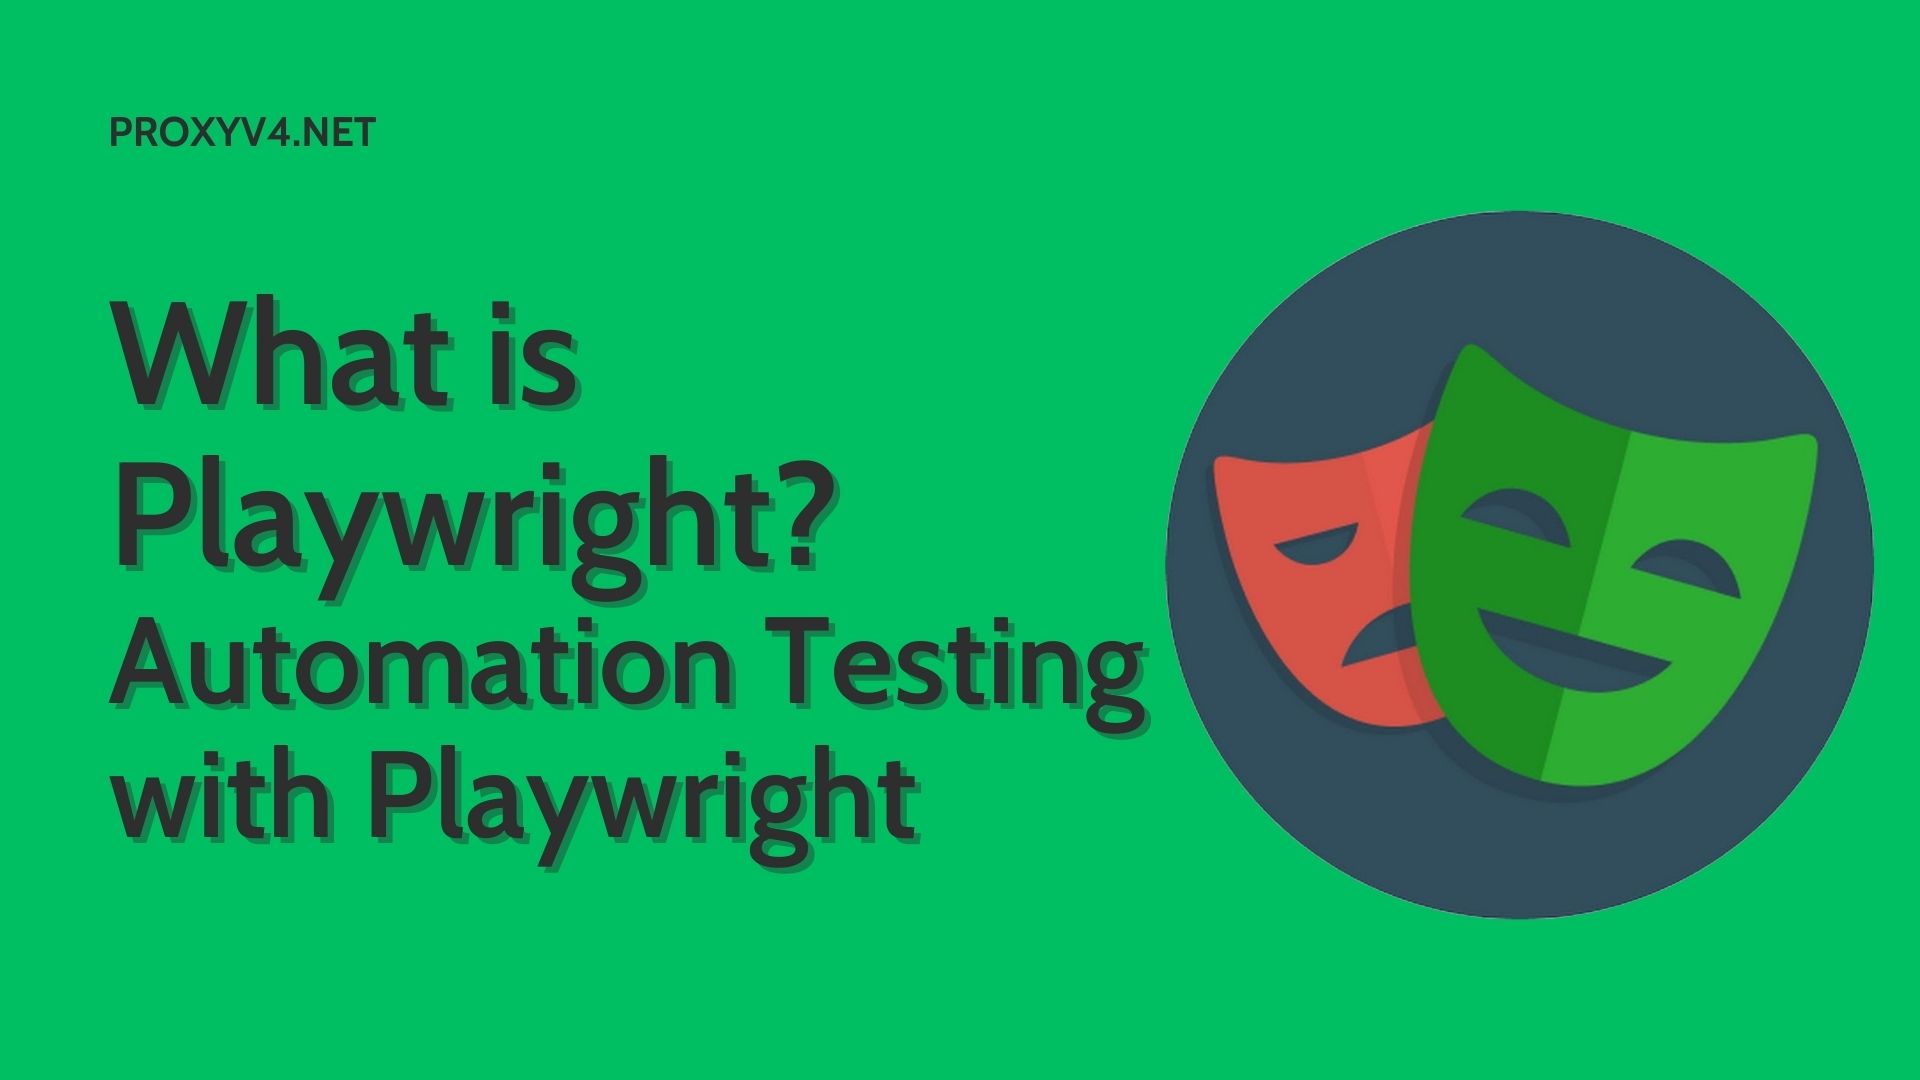 What is Playwright? Automation Testing with Playwright